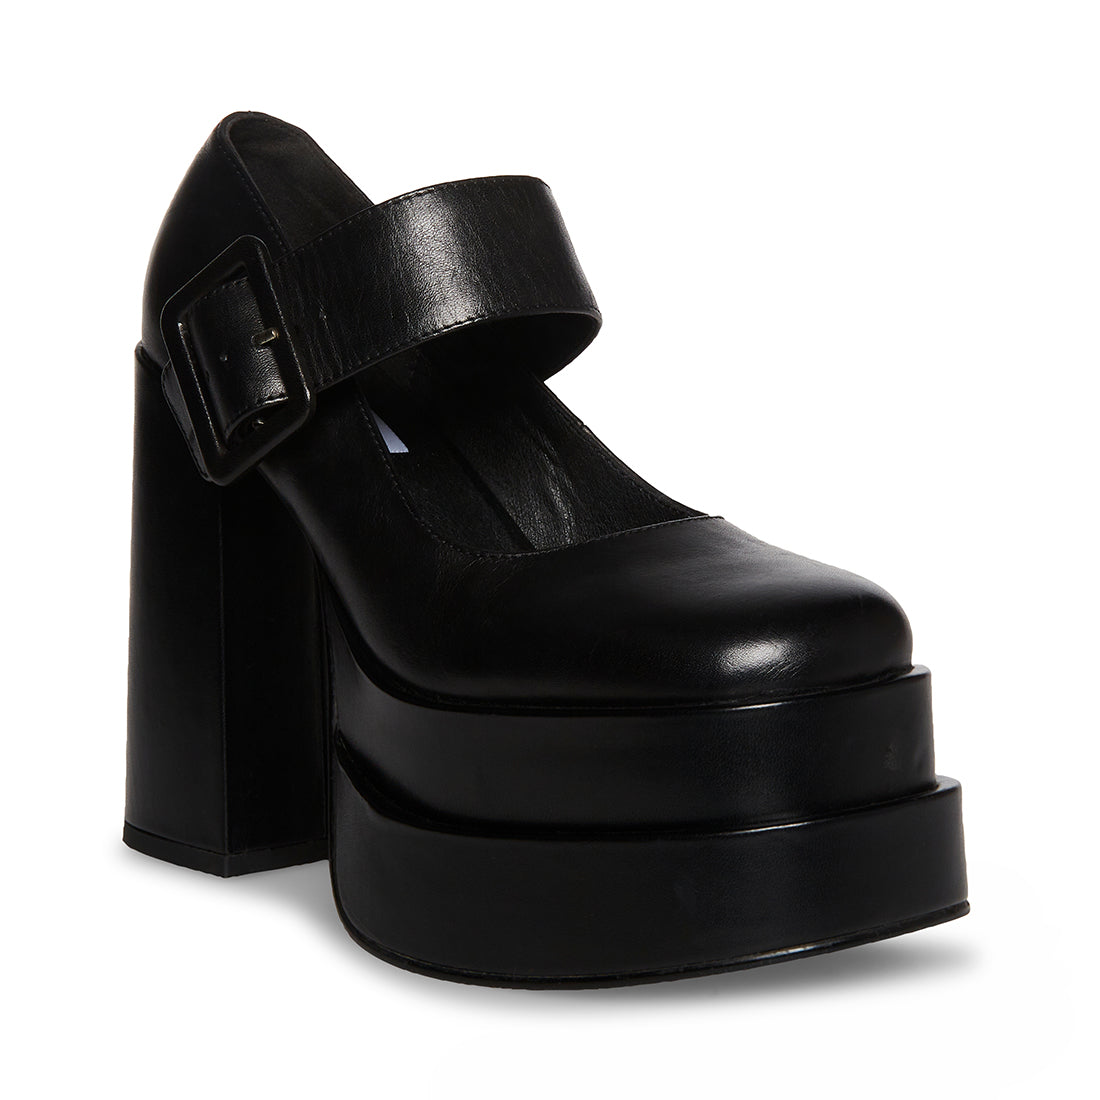 Carly Pump BLACK LEATHER- Hover Image